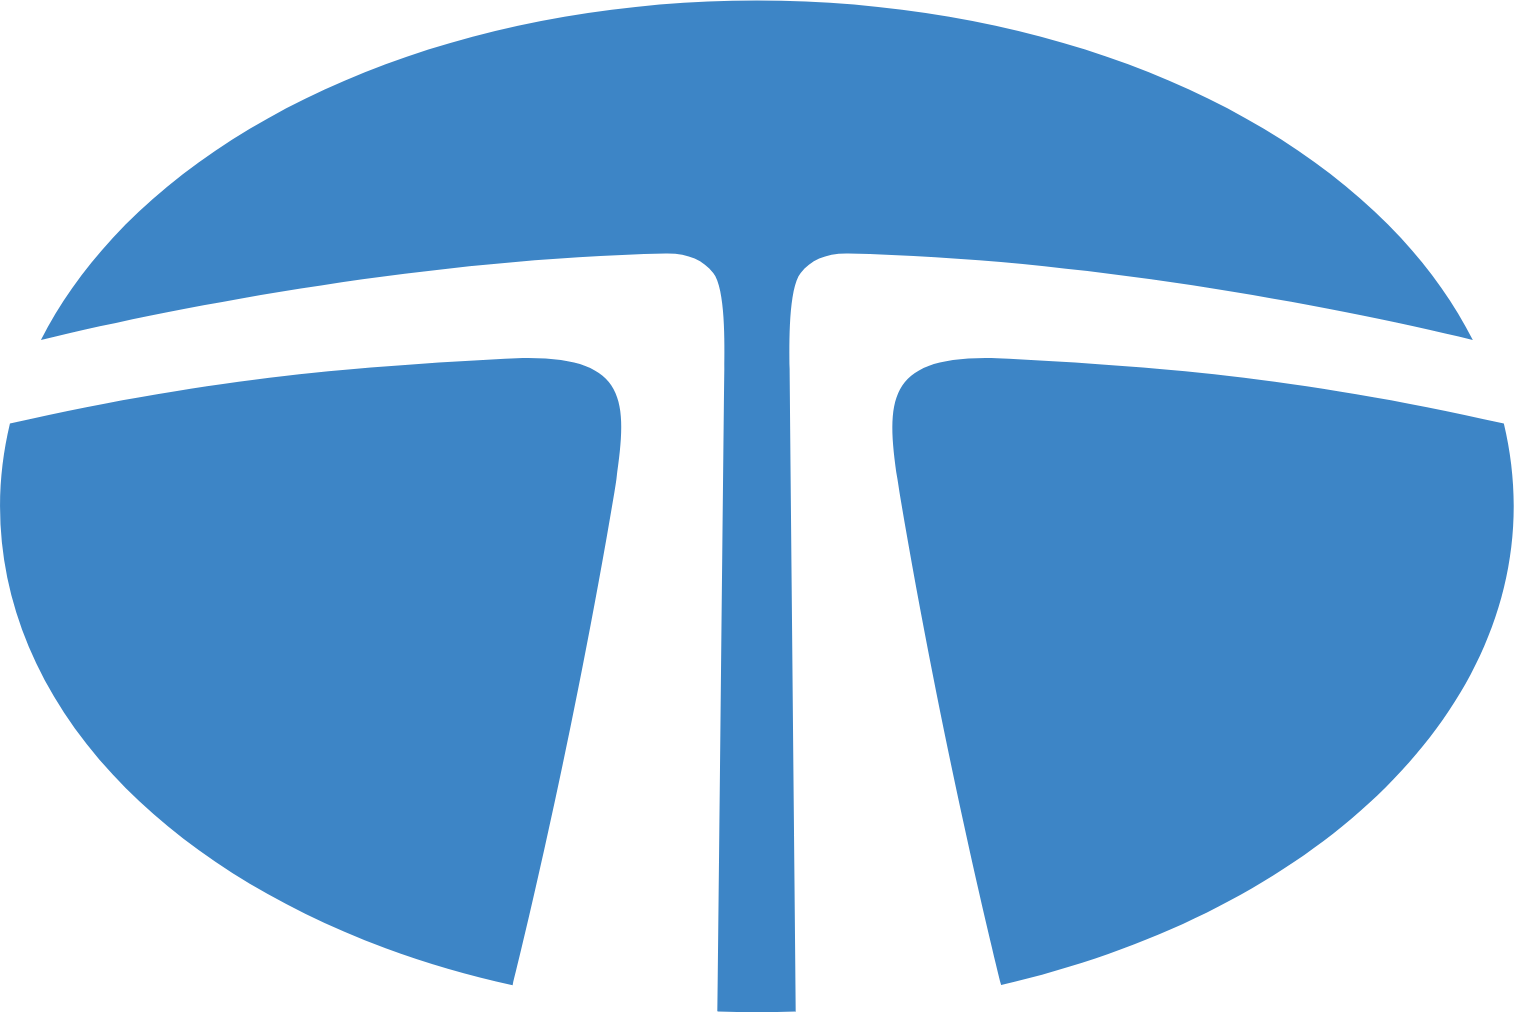 Tata Elxsi logo in transparent PNG and vectorized SVG formats